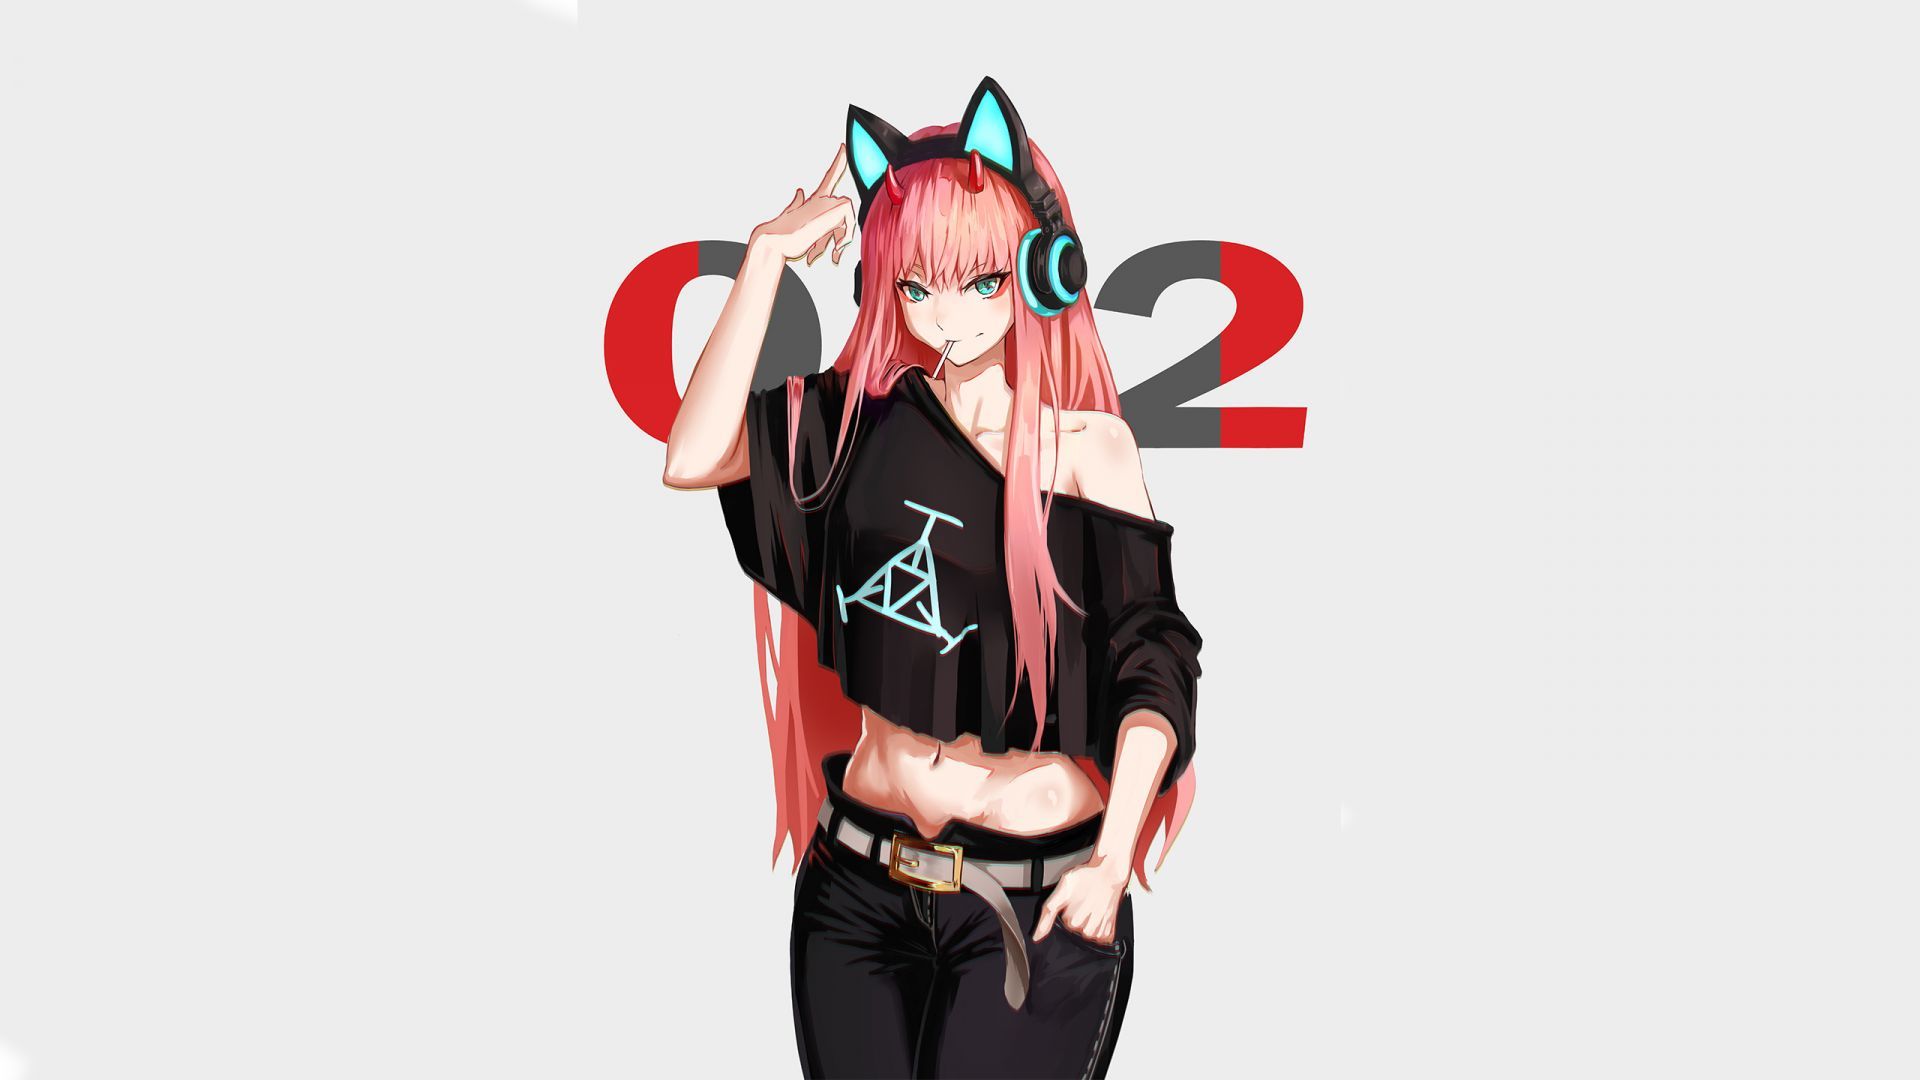 Hot, anime girl, zero two, urban outfit, art wallpaper, HD image, picture, background, b901af